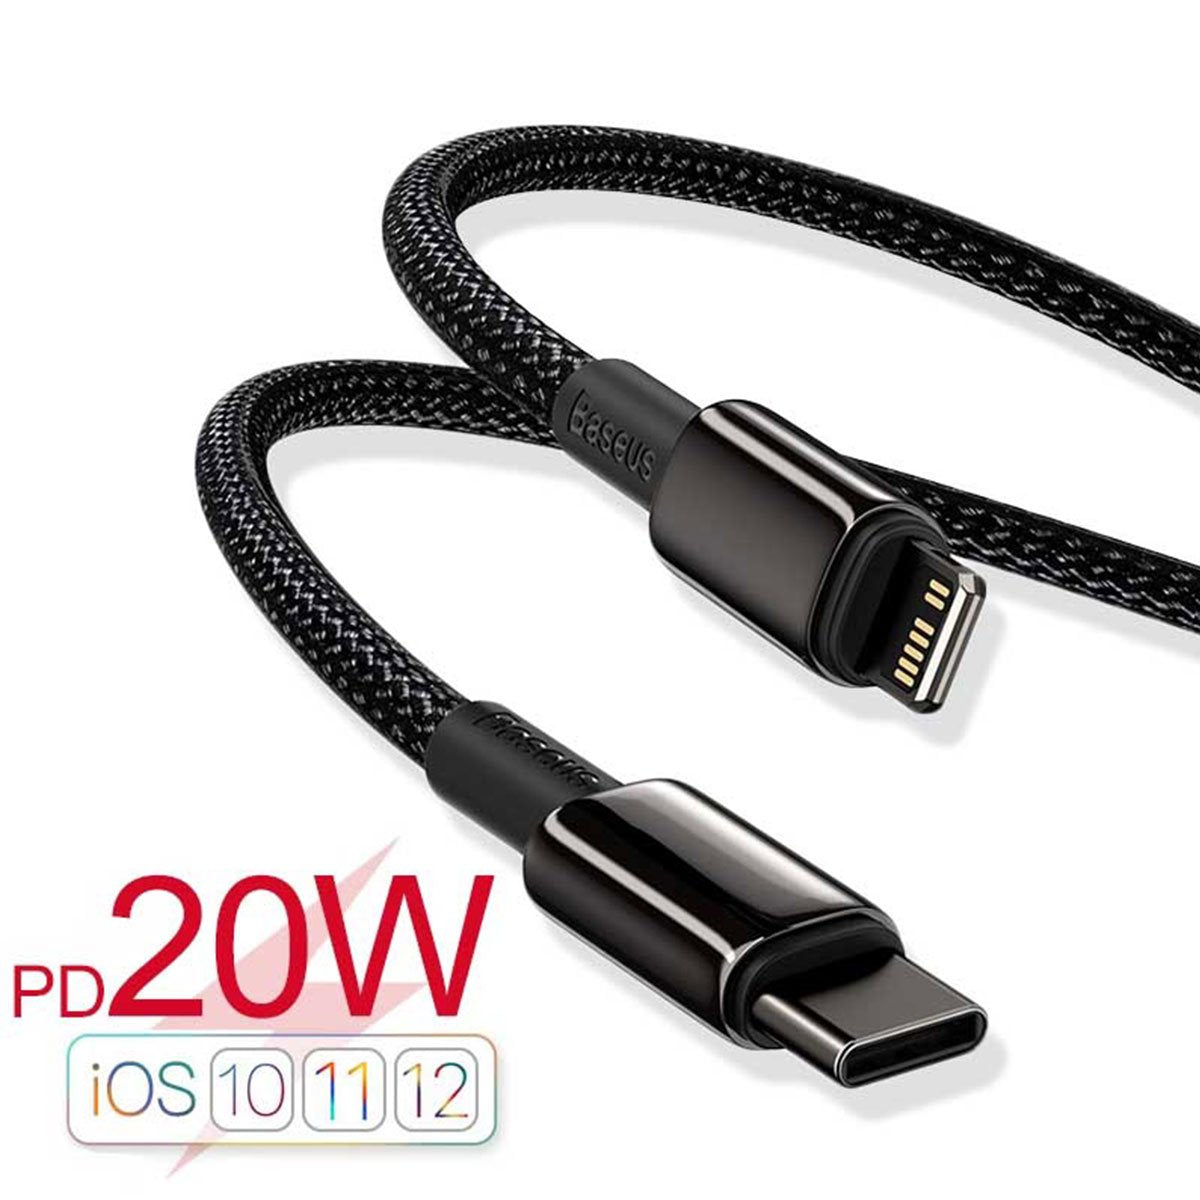 BASEUS PD (20W) TUNGSTEN GOLD FAST CHARGING TYPE-C TO IPH DATA CABLE (2M) - Black